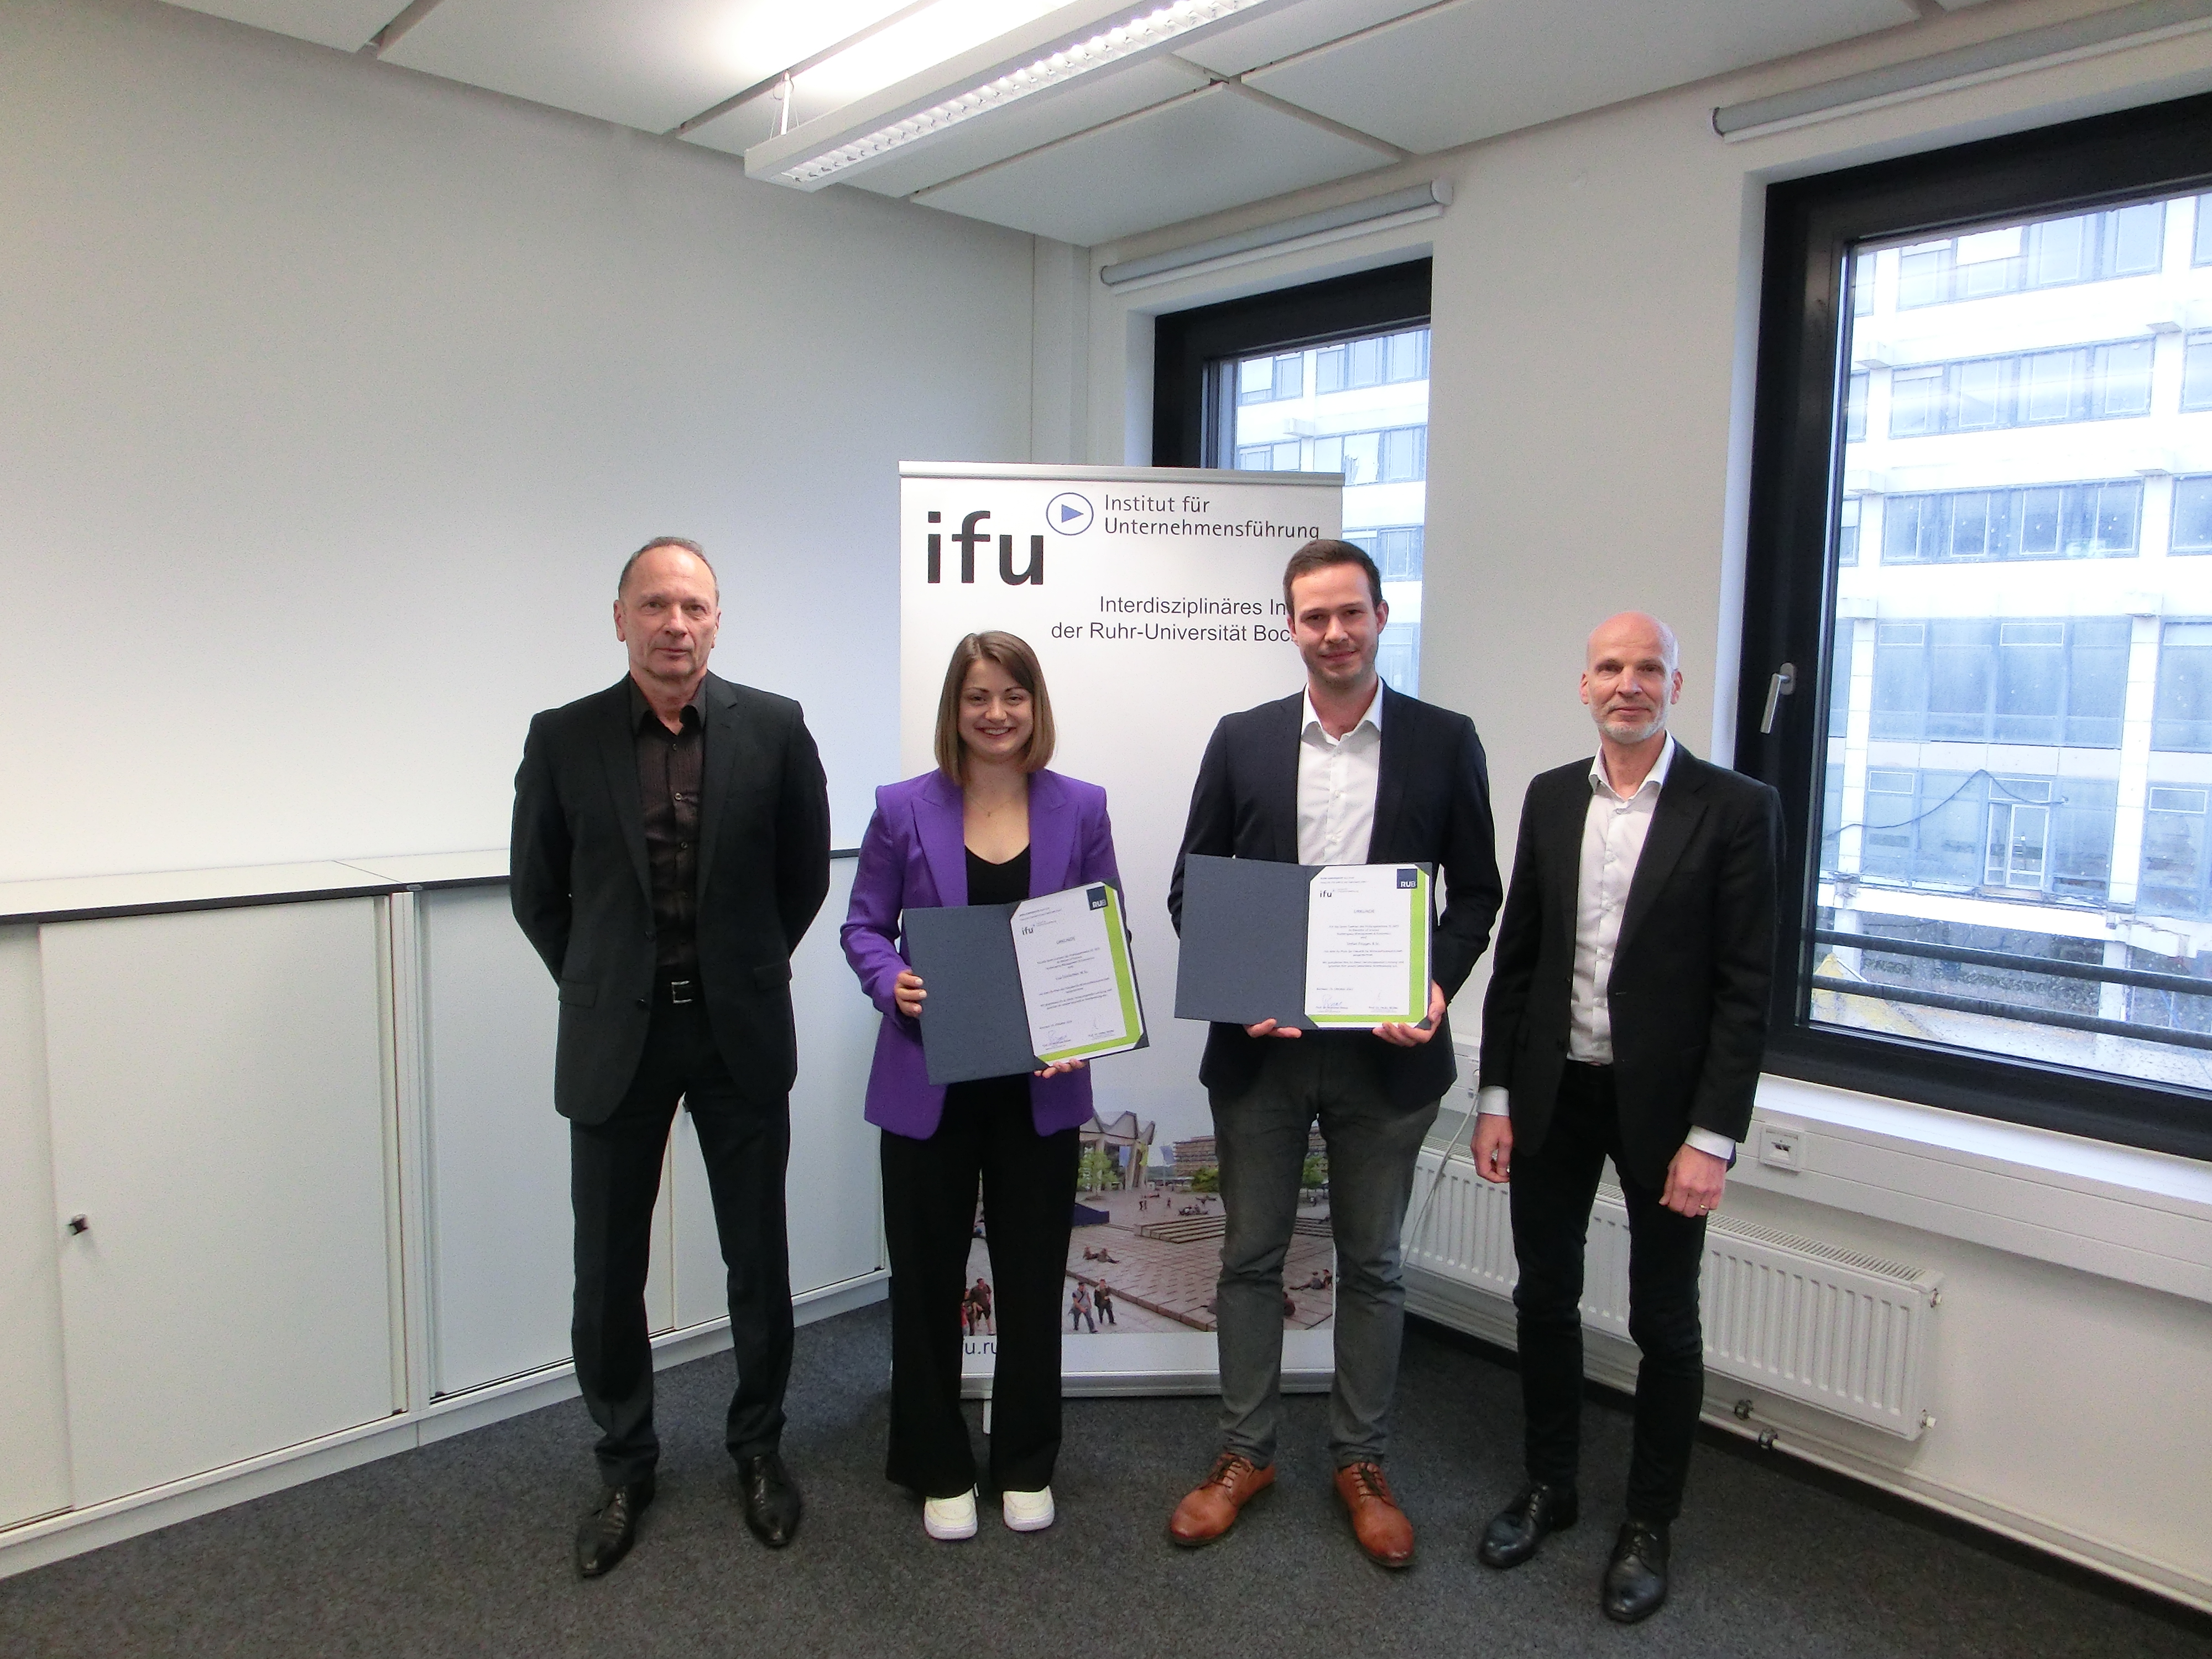 Photo of the winners of the ifu award Lisa Dorlöchter and Stefan Frigger